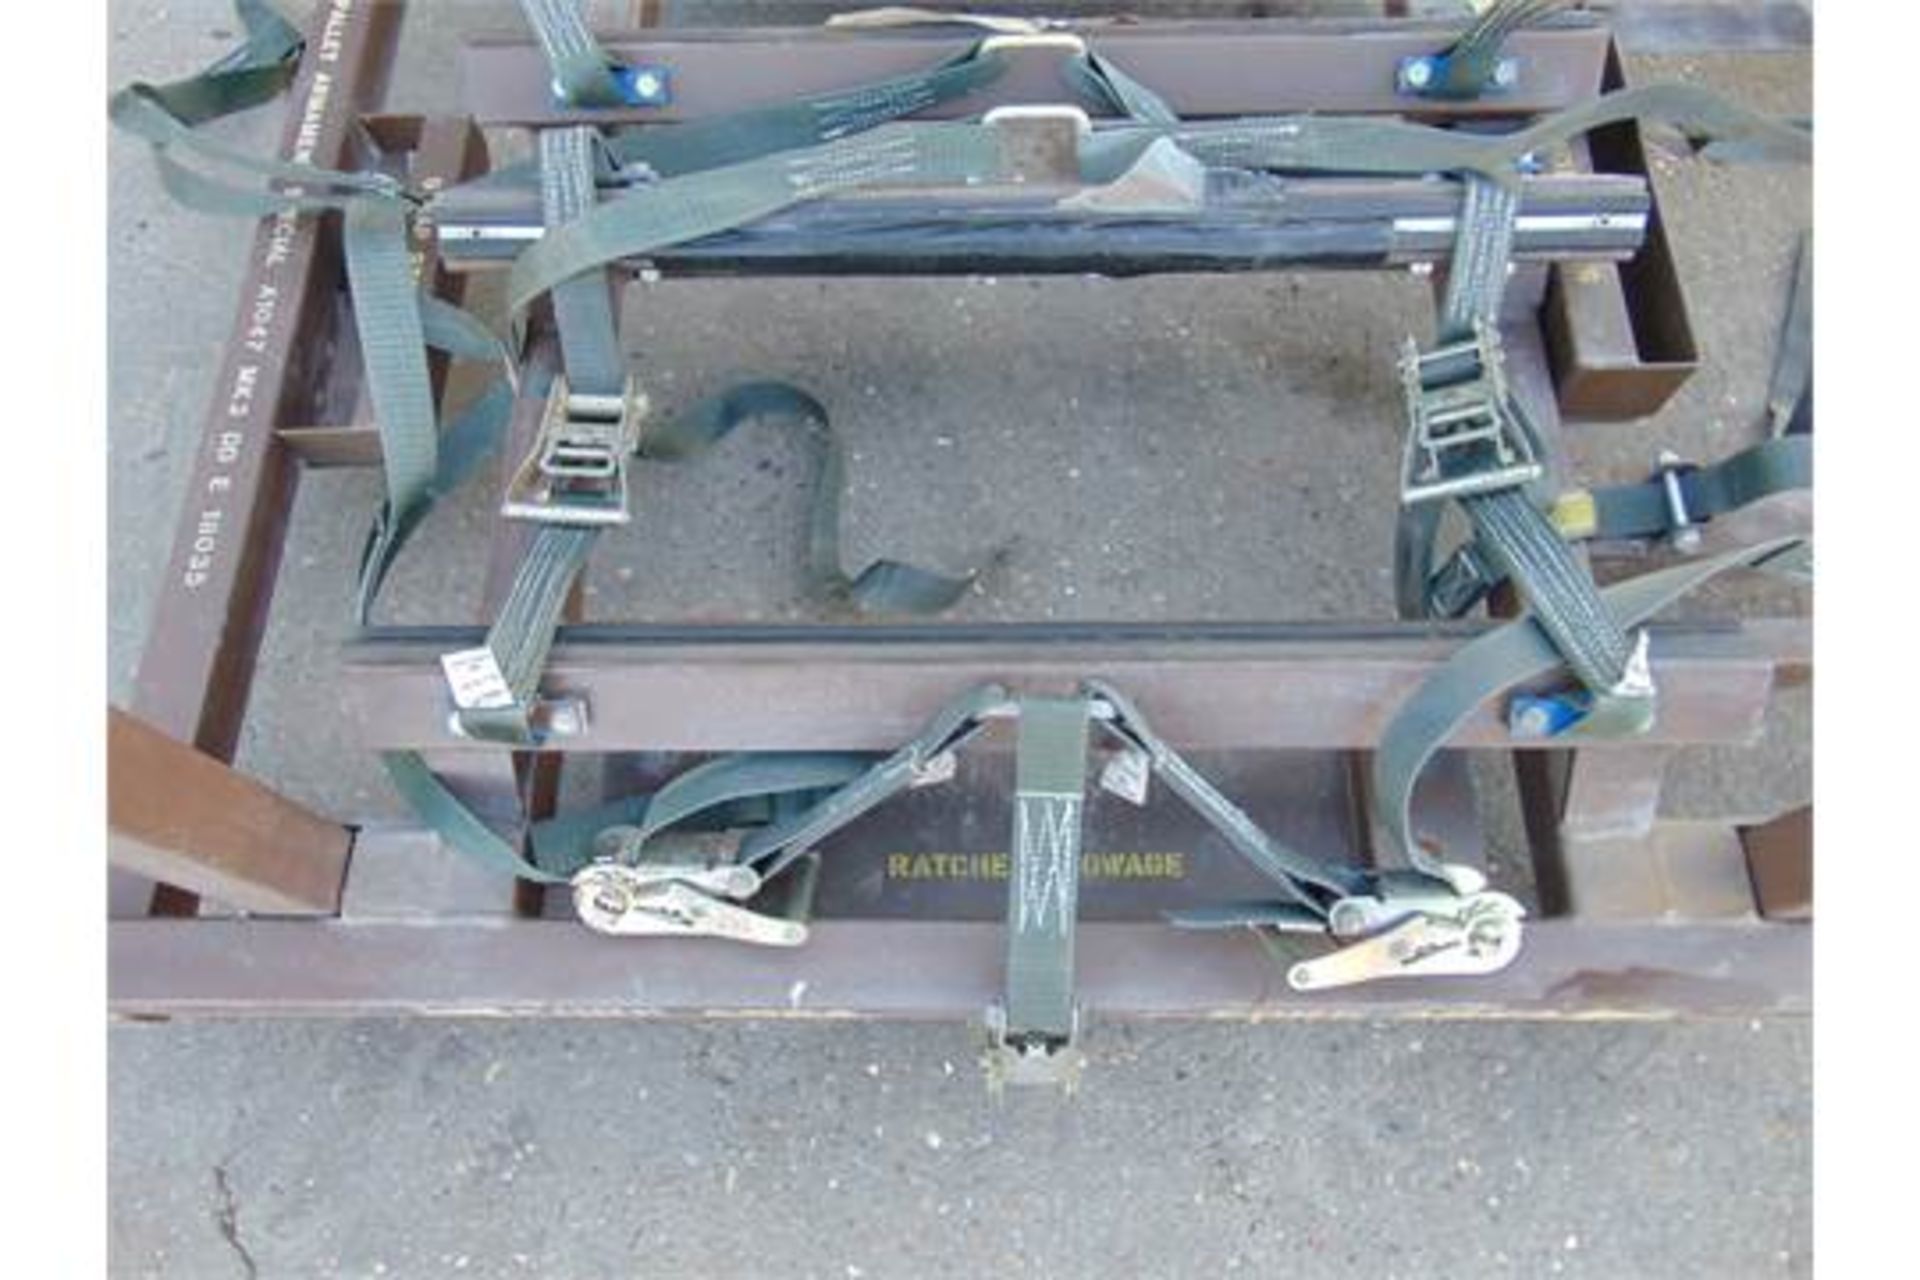 2 x A1047 Mk 3 Stacking Armament / Bomb Pallets with Webbing - Image 5 of 11